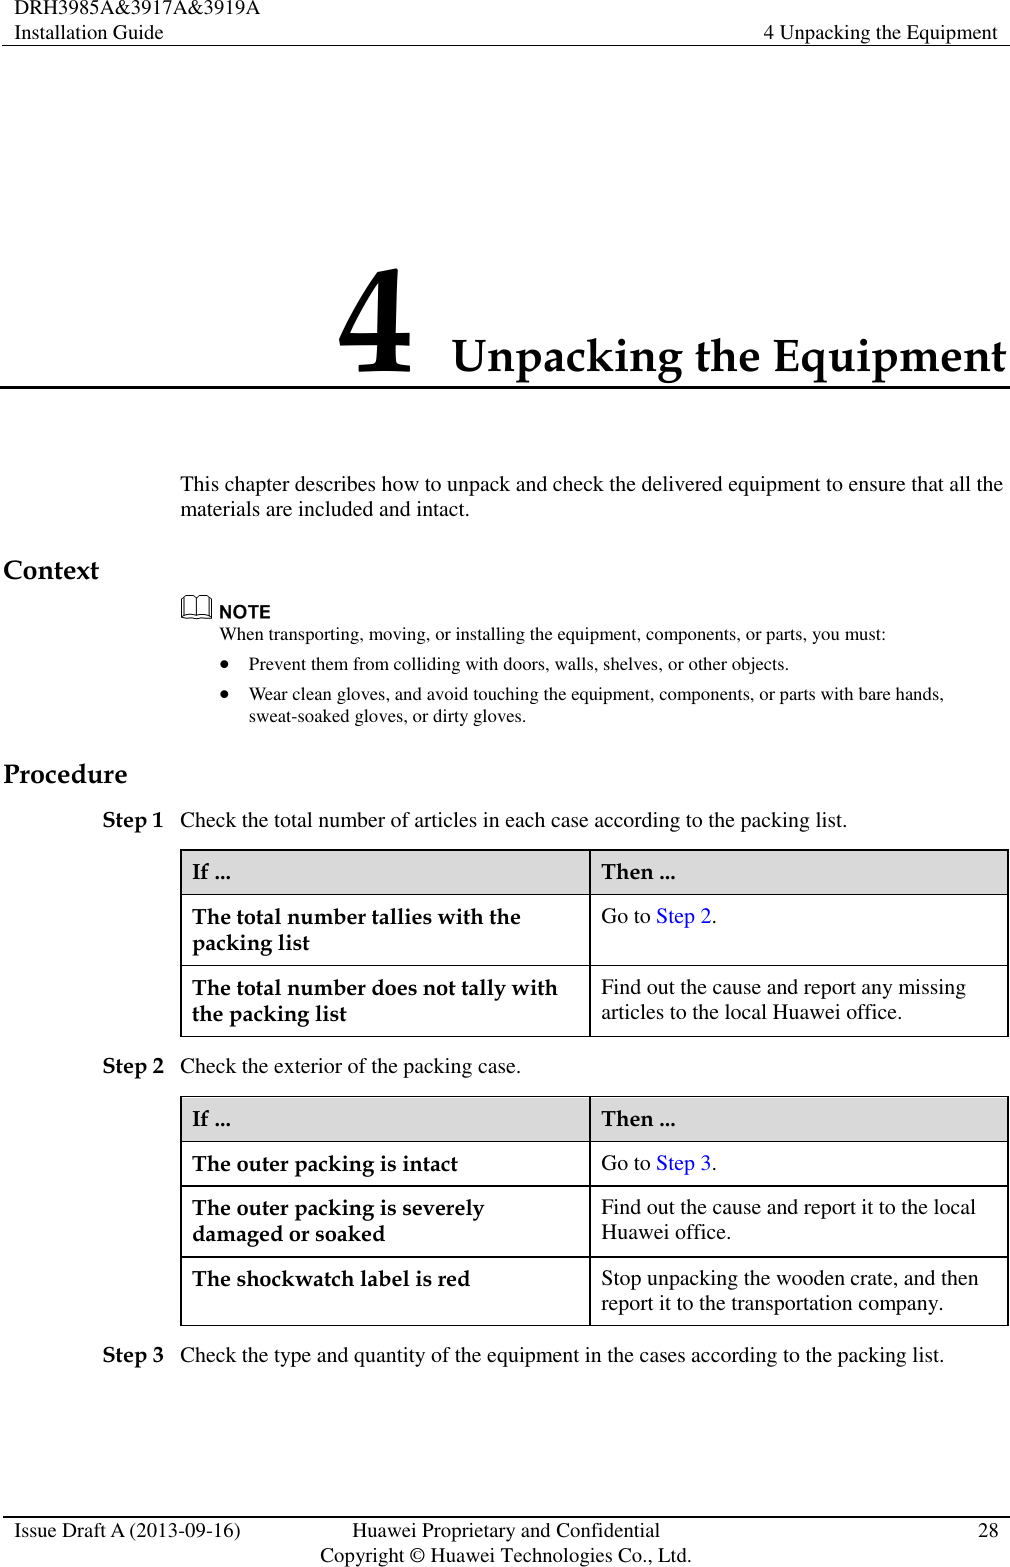 DRH3985A&amp;3917A&amp;3919A Installation Guide 4 Unpacking the Equipment  Issue Draft A (2013-09-16) Huawei Proprietary and Confidential                                     Copyright © Huawei Technologies Co., Ltd. 28  4 Unpacking the Equipment This chapter describes how to unpack and check the delivered equipment to ensure that all the materials are included and intact. Context  When transporting, moving, or installing the equipment, components, or parts, you must:  Prevent them from colliding with doors, walls, shelves, or other objects.  Wear clean gloves, and avoid touching the equipment, components, or parts with bare hands, sweat-soaked gloves, or dirty gloves. Procedure Step 1 Check the total number of articles in each case according to the packing list. If ... Then ... The total number tallies with the packing list Go to Step 2. The total number does not tally with the packing list Find out the cause and report any missing articles to the local Huawei office. Step 2 Check the exterior of the packing case. If ... Then ... The outer packing is intact Go to Step 3. The outer packing is severely damaged or soaked Find out the cause and report it to the local Huawei office. The shockwatch label is red Stop unpacking the wooden crate, and then report it to the transportation company. Step 3 Check the type and quantity of the equipment in the cases according to the packing list. 